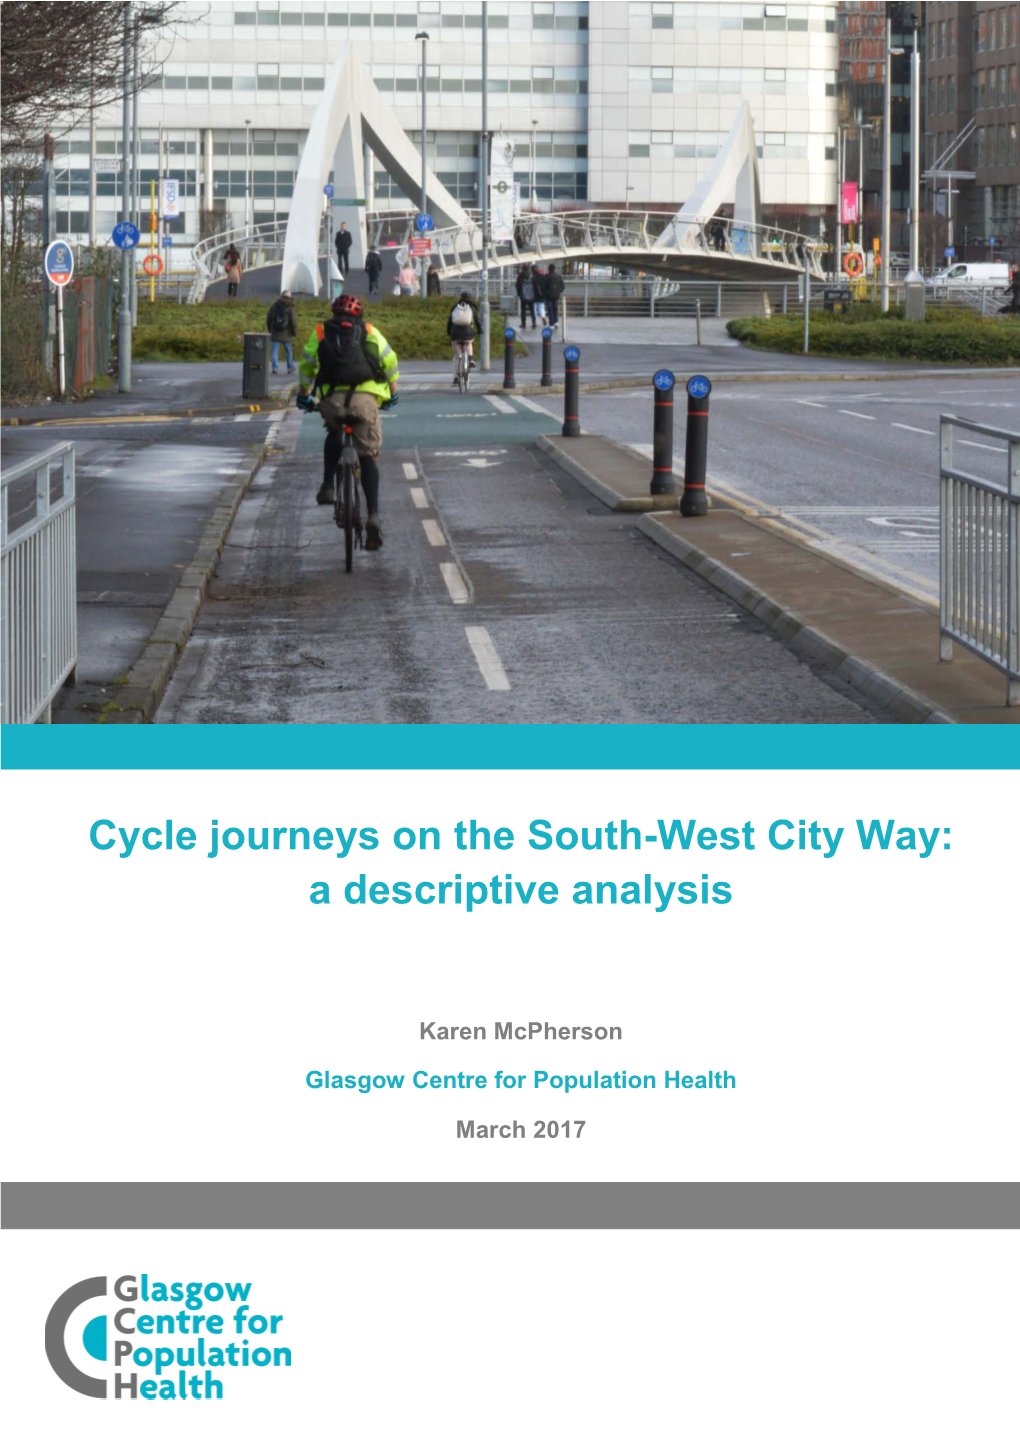 Cycle Journeys on the South-West City Way: a Descriptive Analysis